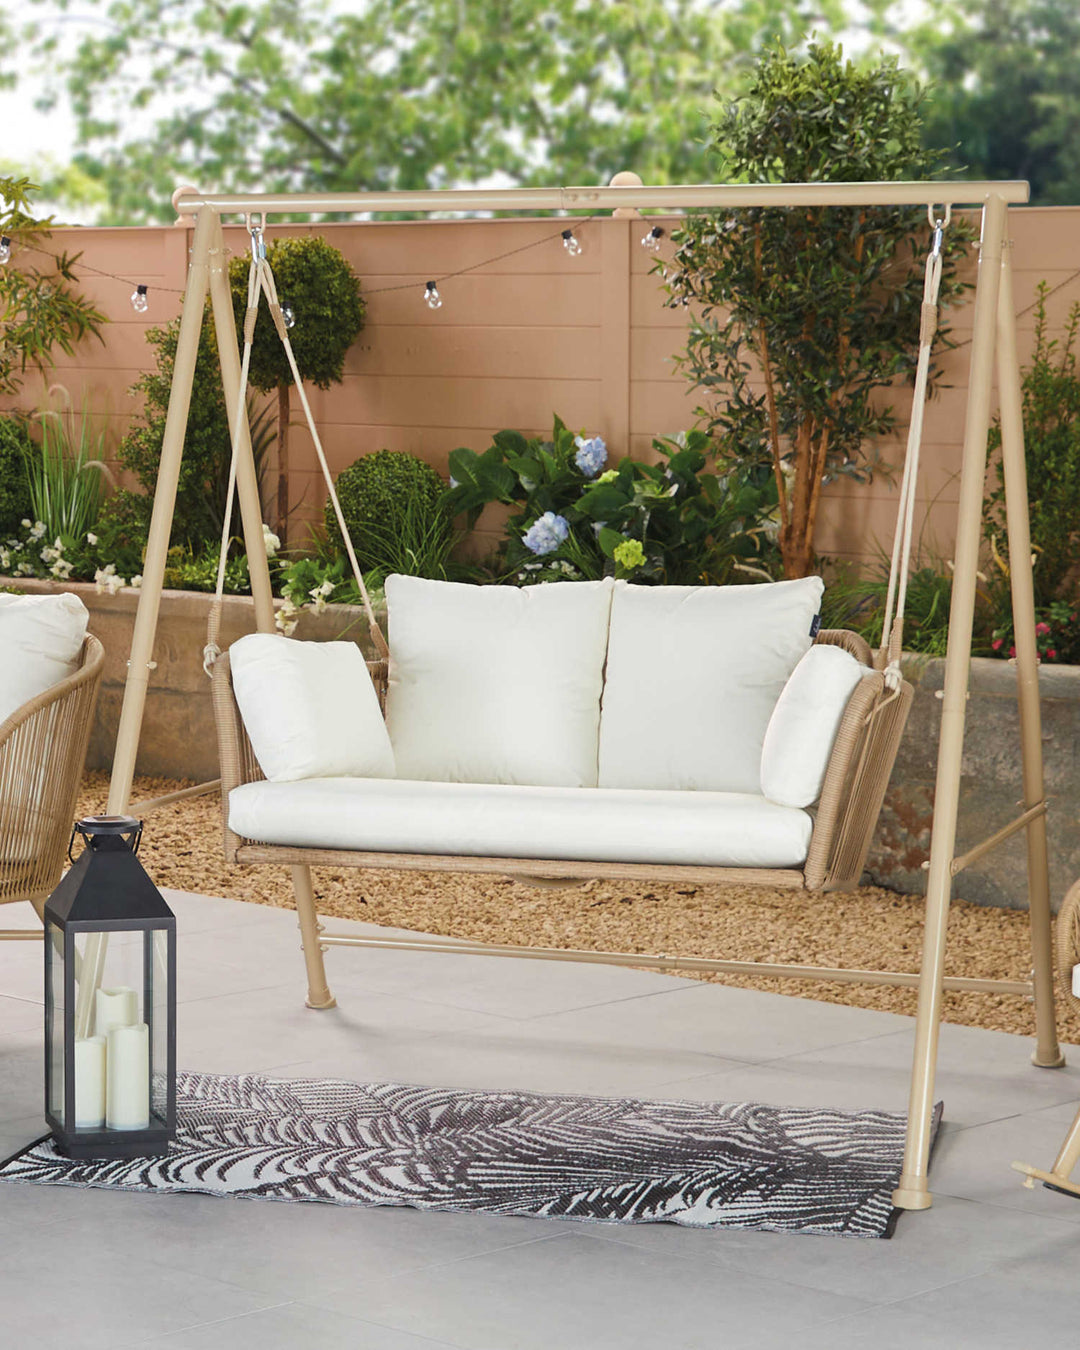 Sirena Double Seater Hanging Swing With Stand For Balcony , Garden Swing (White +Tan)